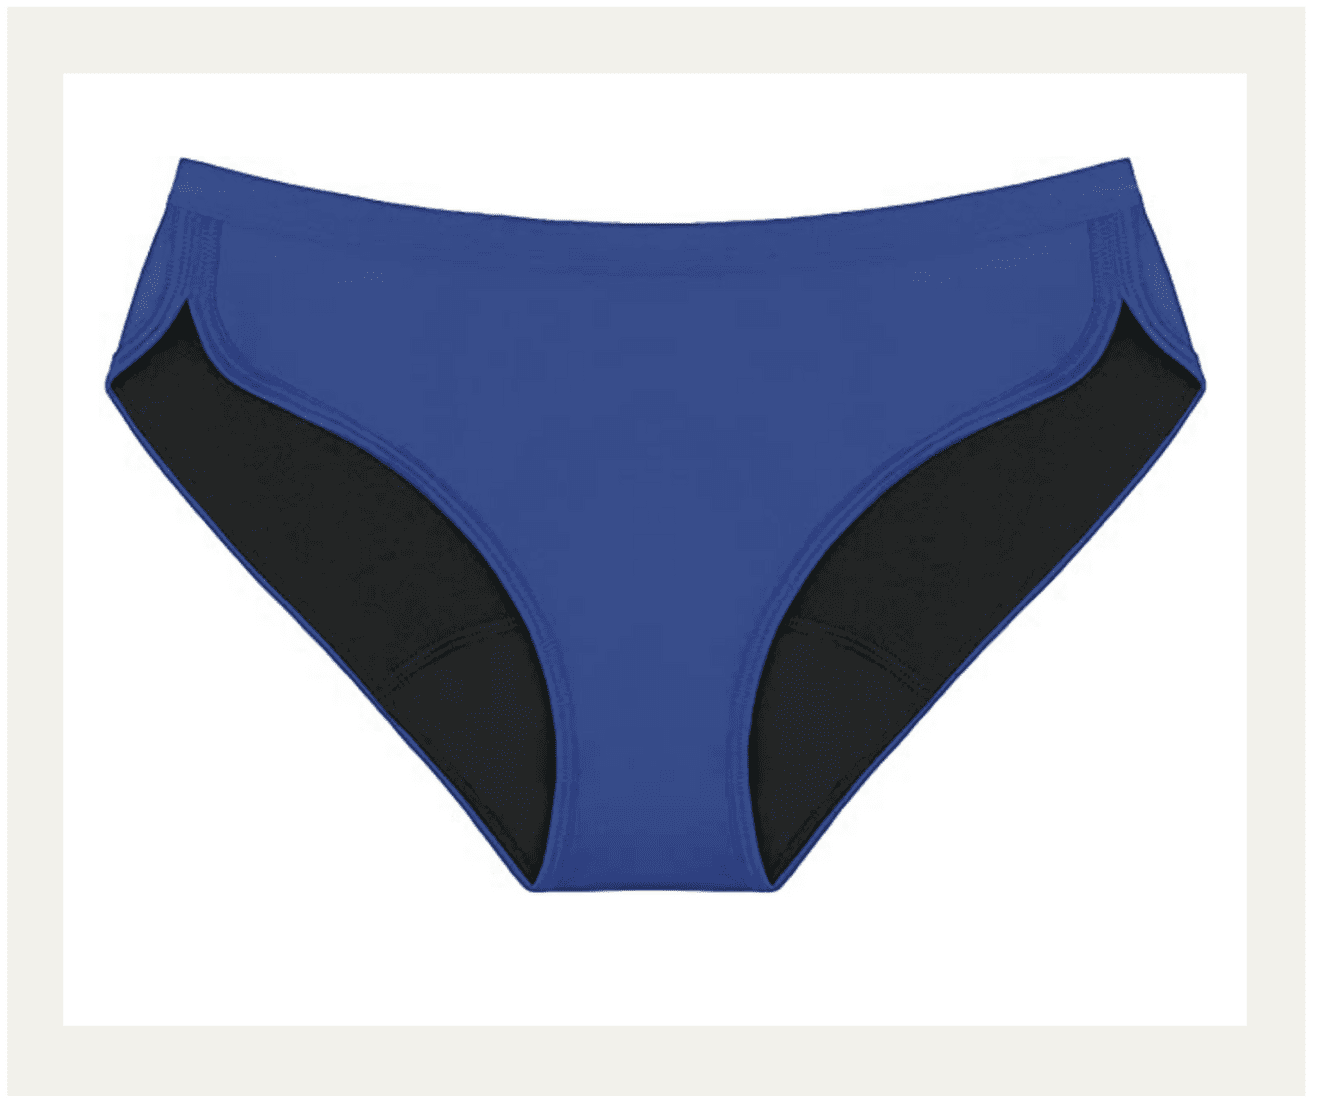 Thinx Underwear | Self-Isolation Survival Kit -- Here's what to buy to keep you sane at home